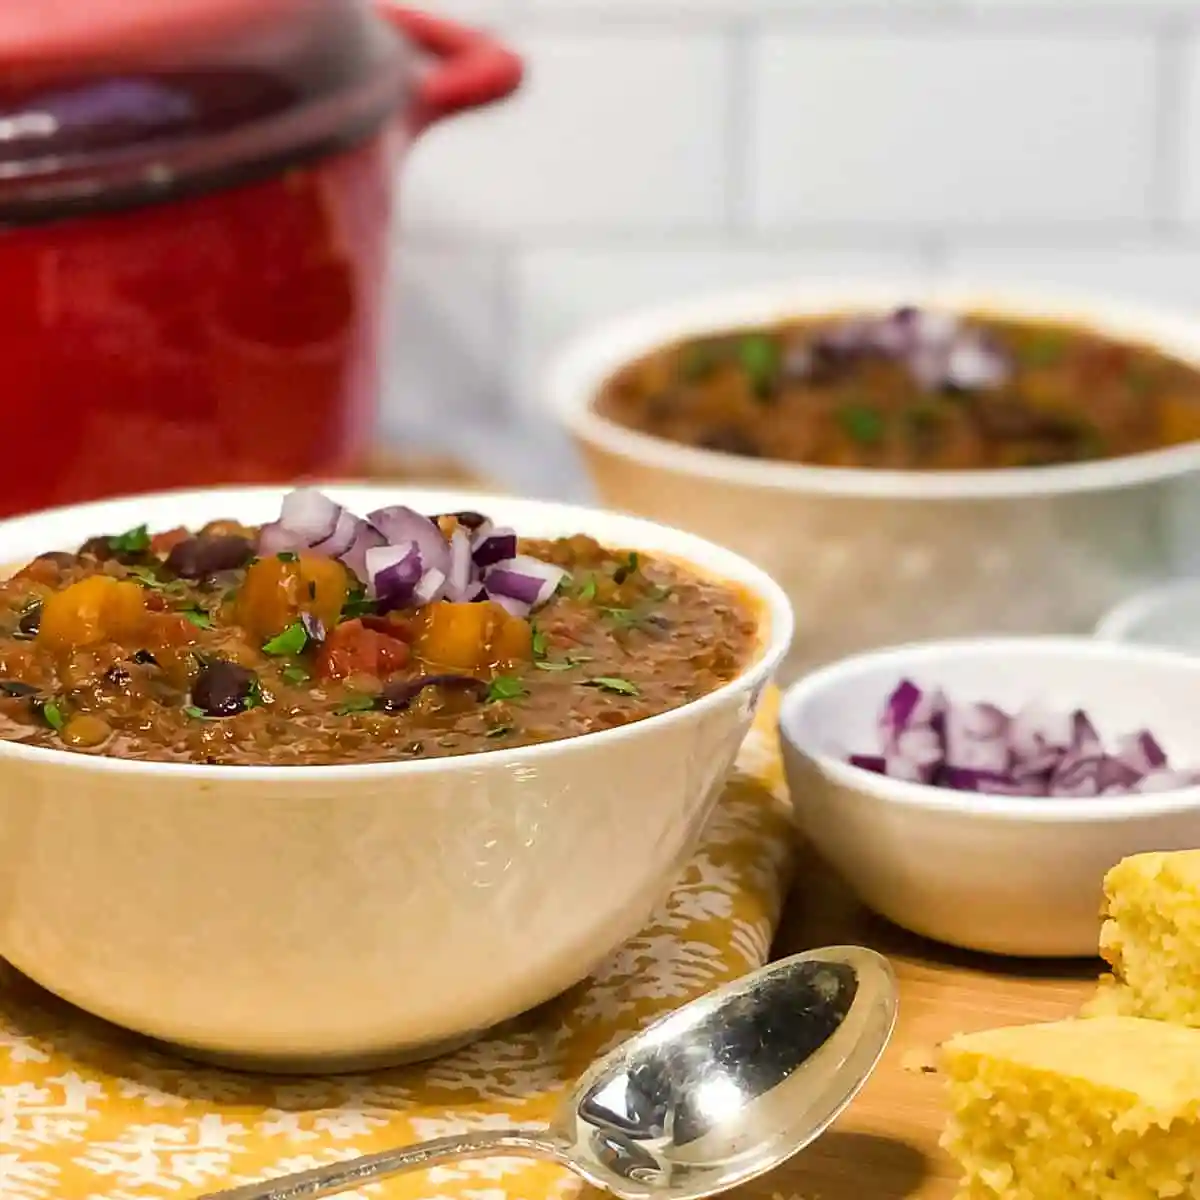 Vegetarian Chili With Lentils and Butternut Squash